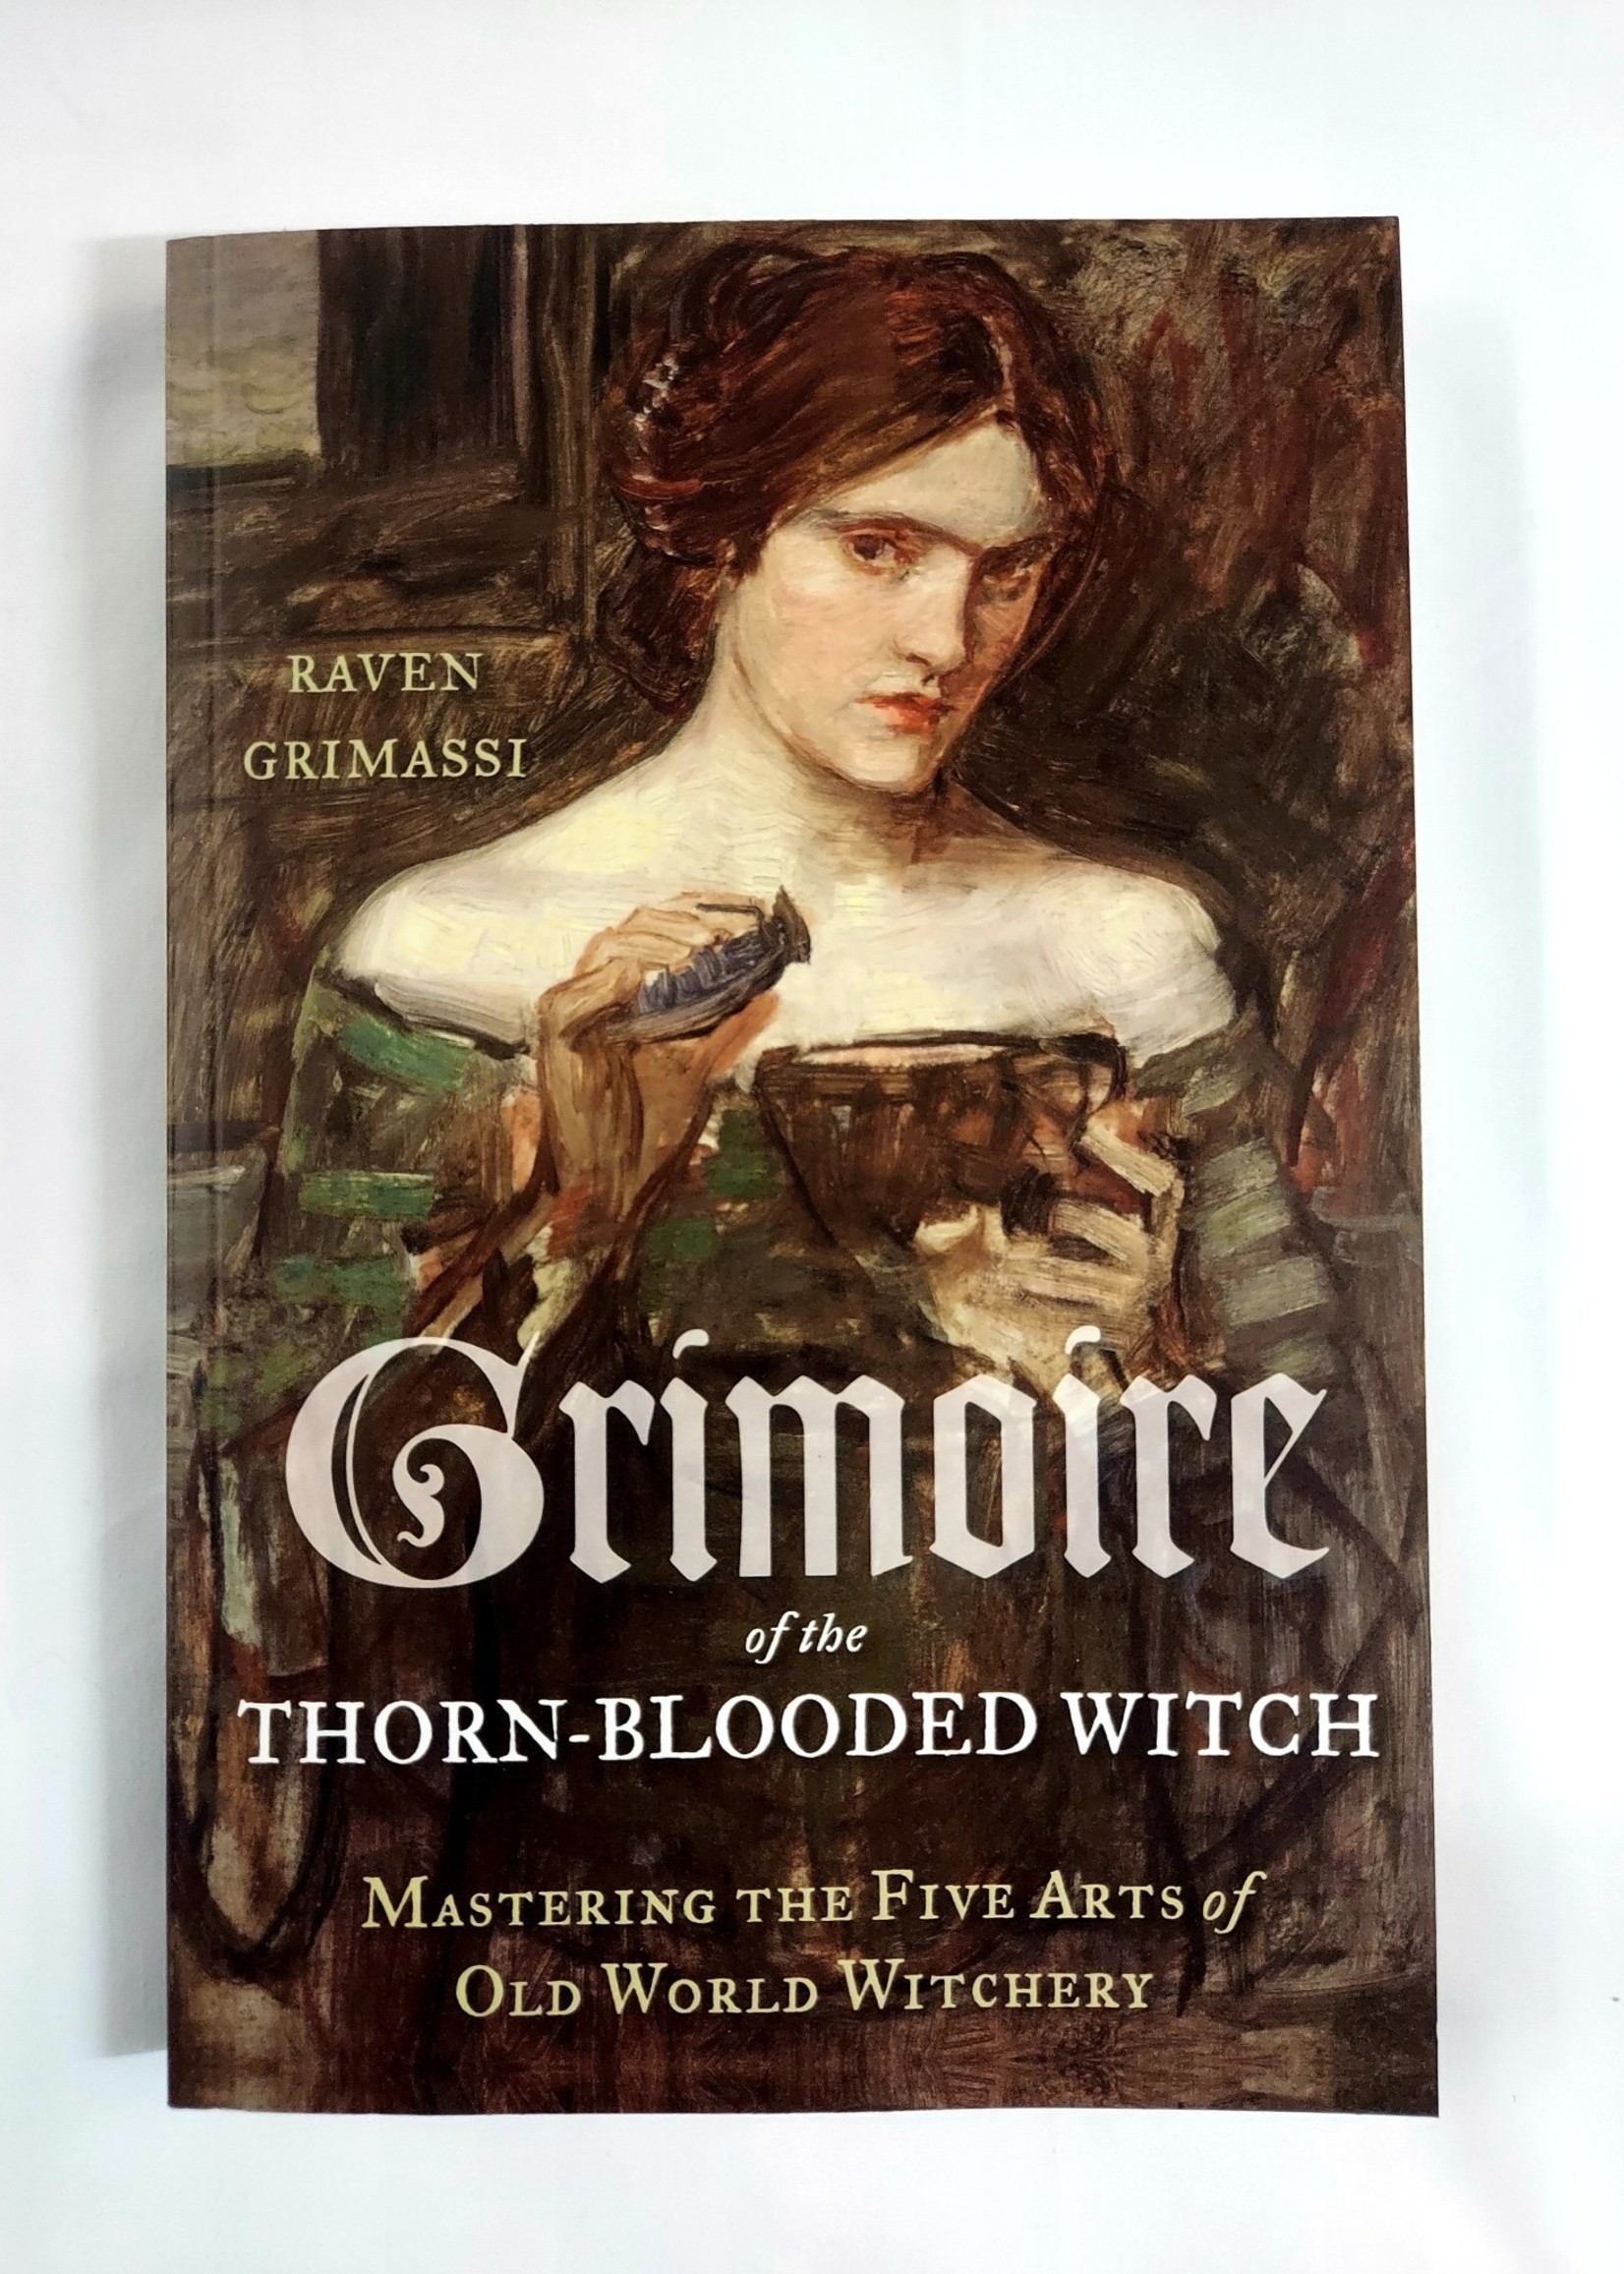 Grimoire of the Thorn-Blooded Witch Mastering the Five Arts of Old World Witchery Raven Grimassi